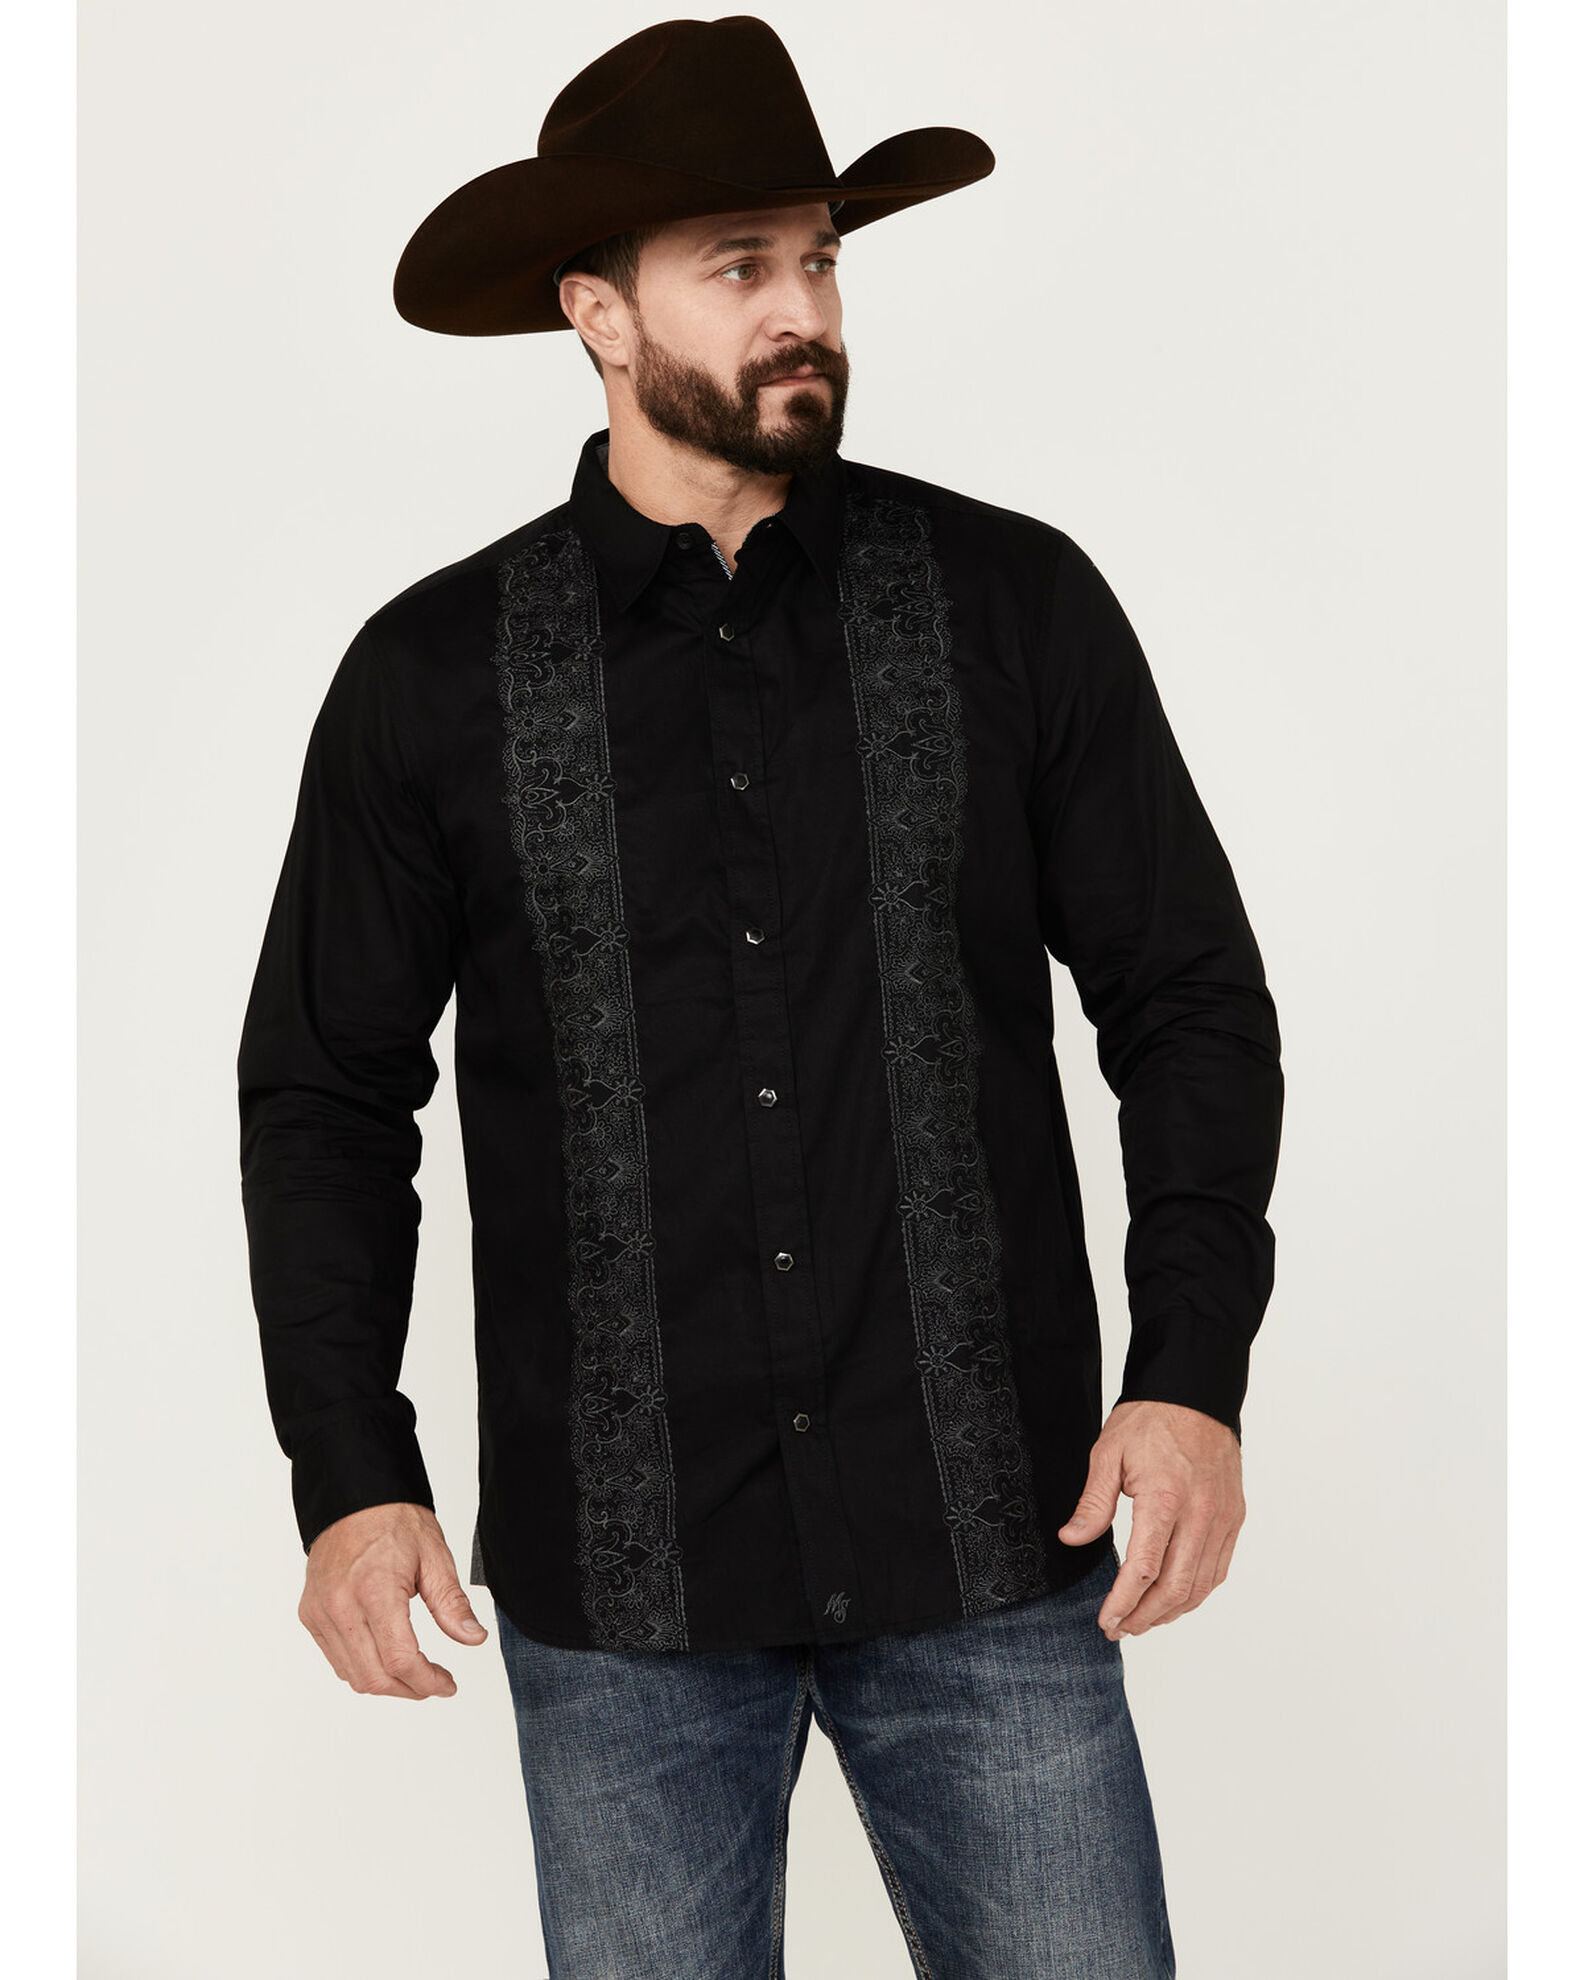 LUCKY LEGEND WESTERN EMBROIDERED SHIRT